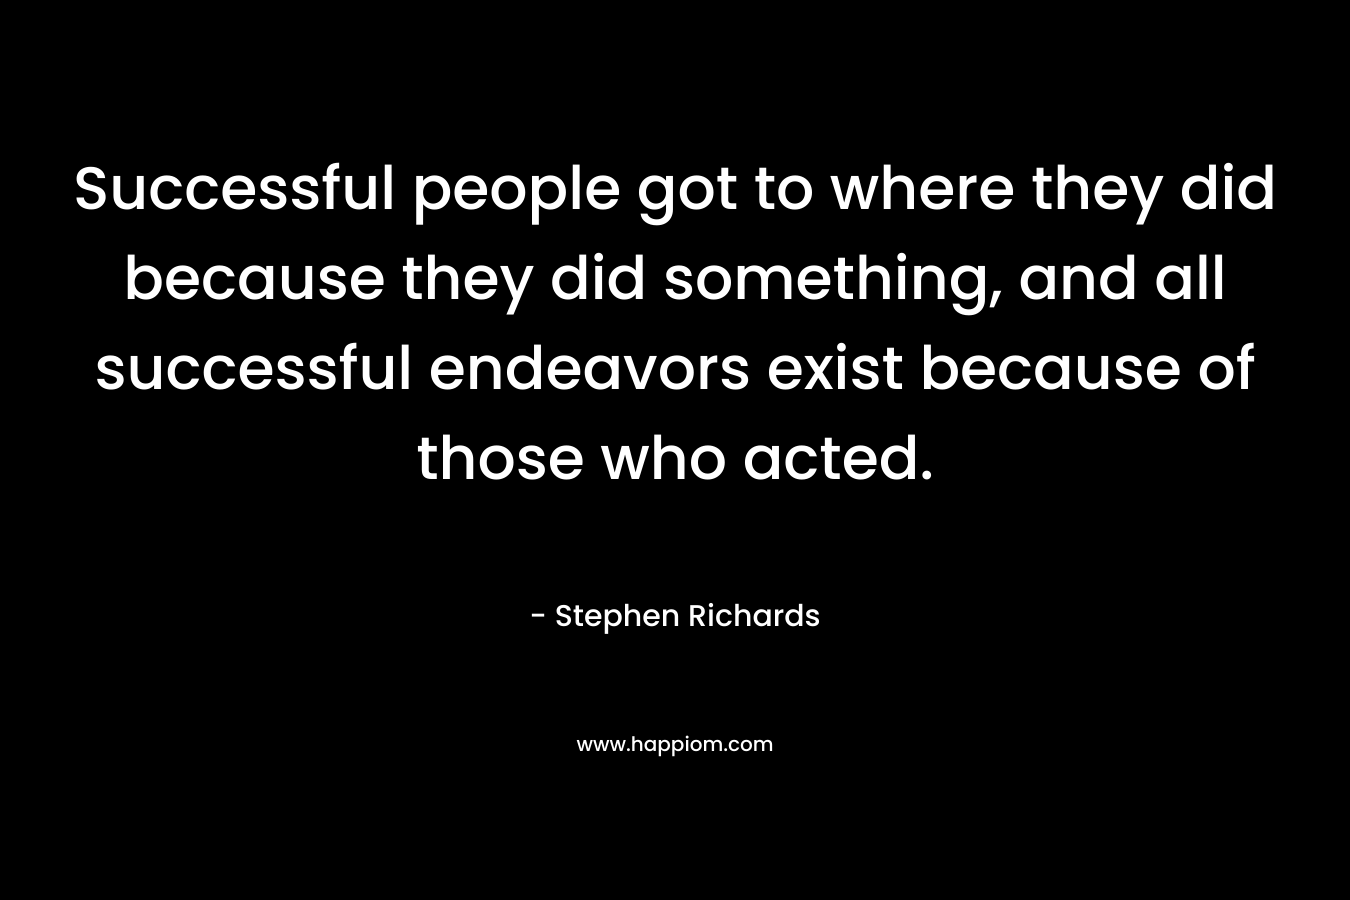 Successful people got to where they did because they did something, and all successful endeavors exist because of those who acted. – Stephen Richards